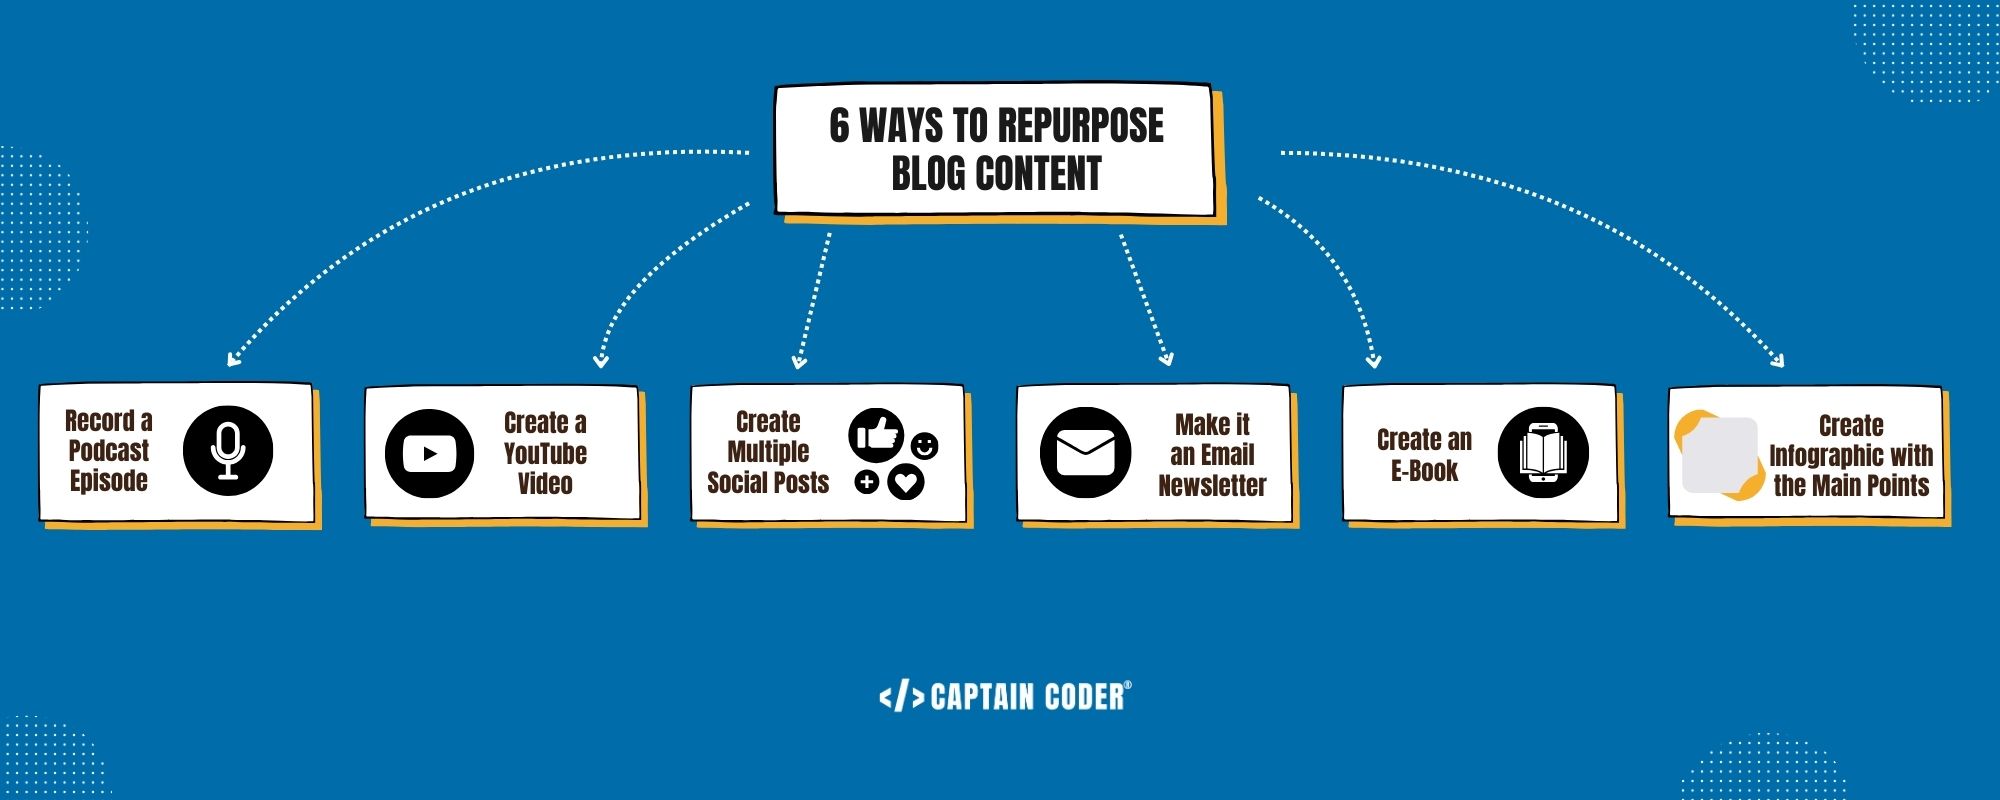 outlining the 6 ways you can repurpose blog content